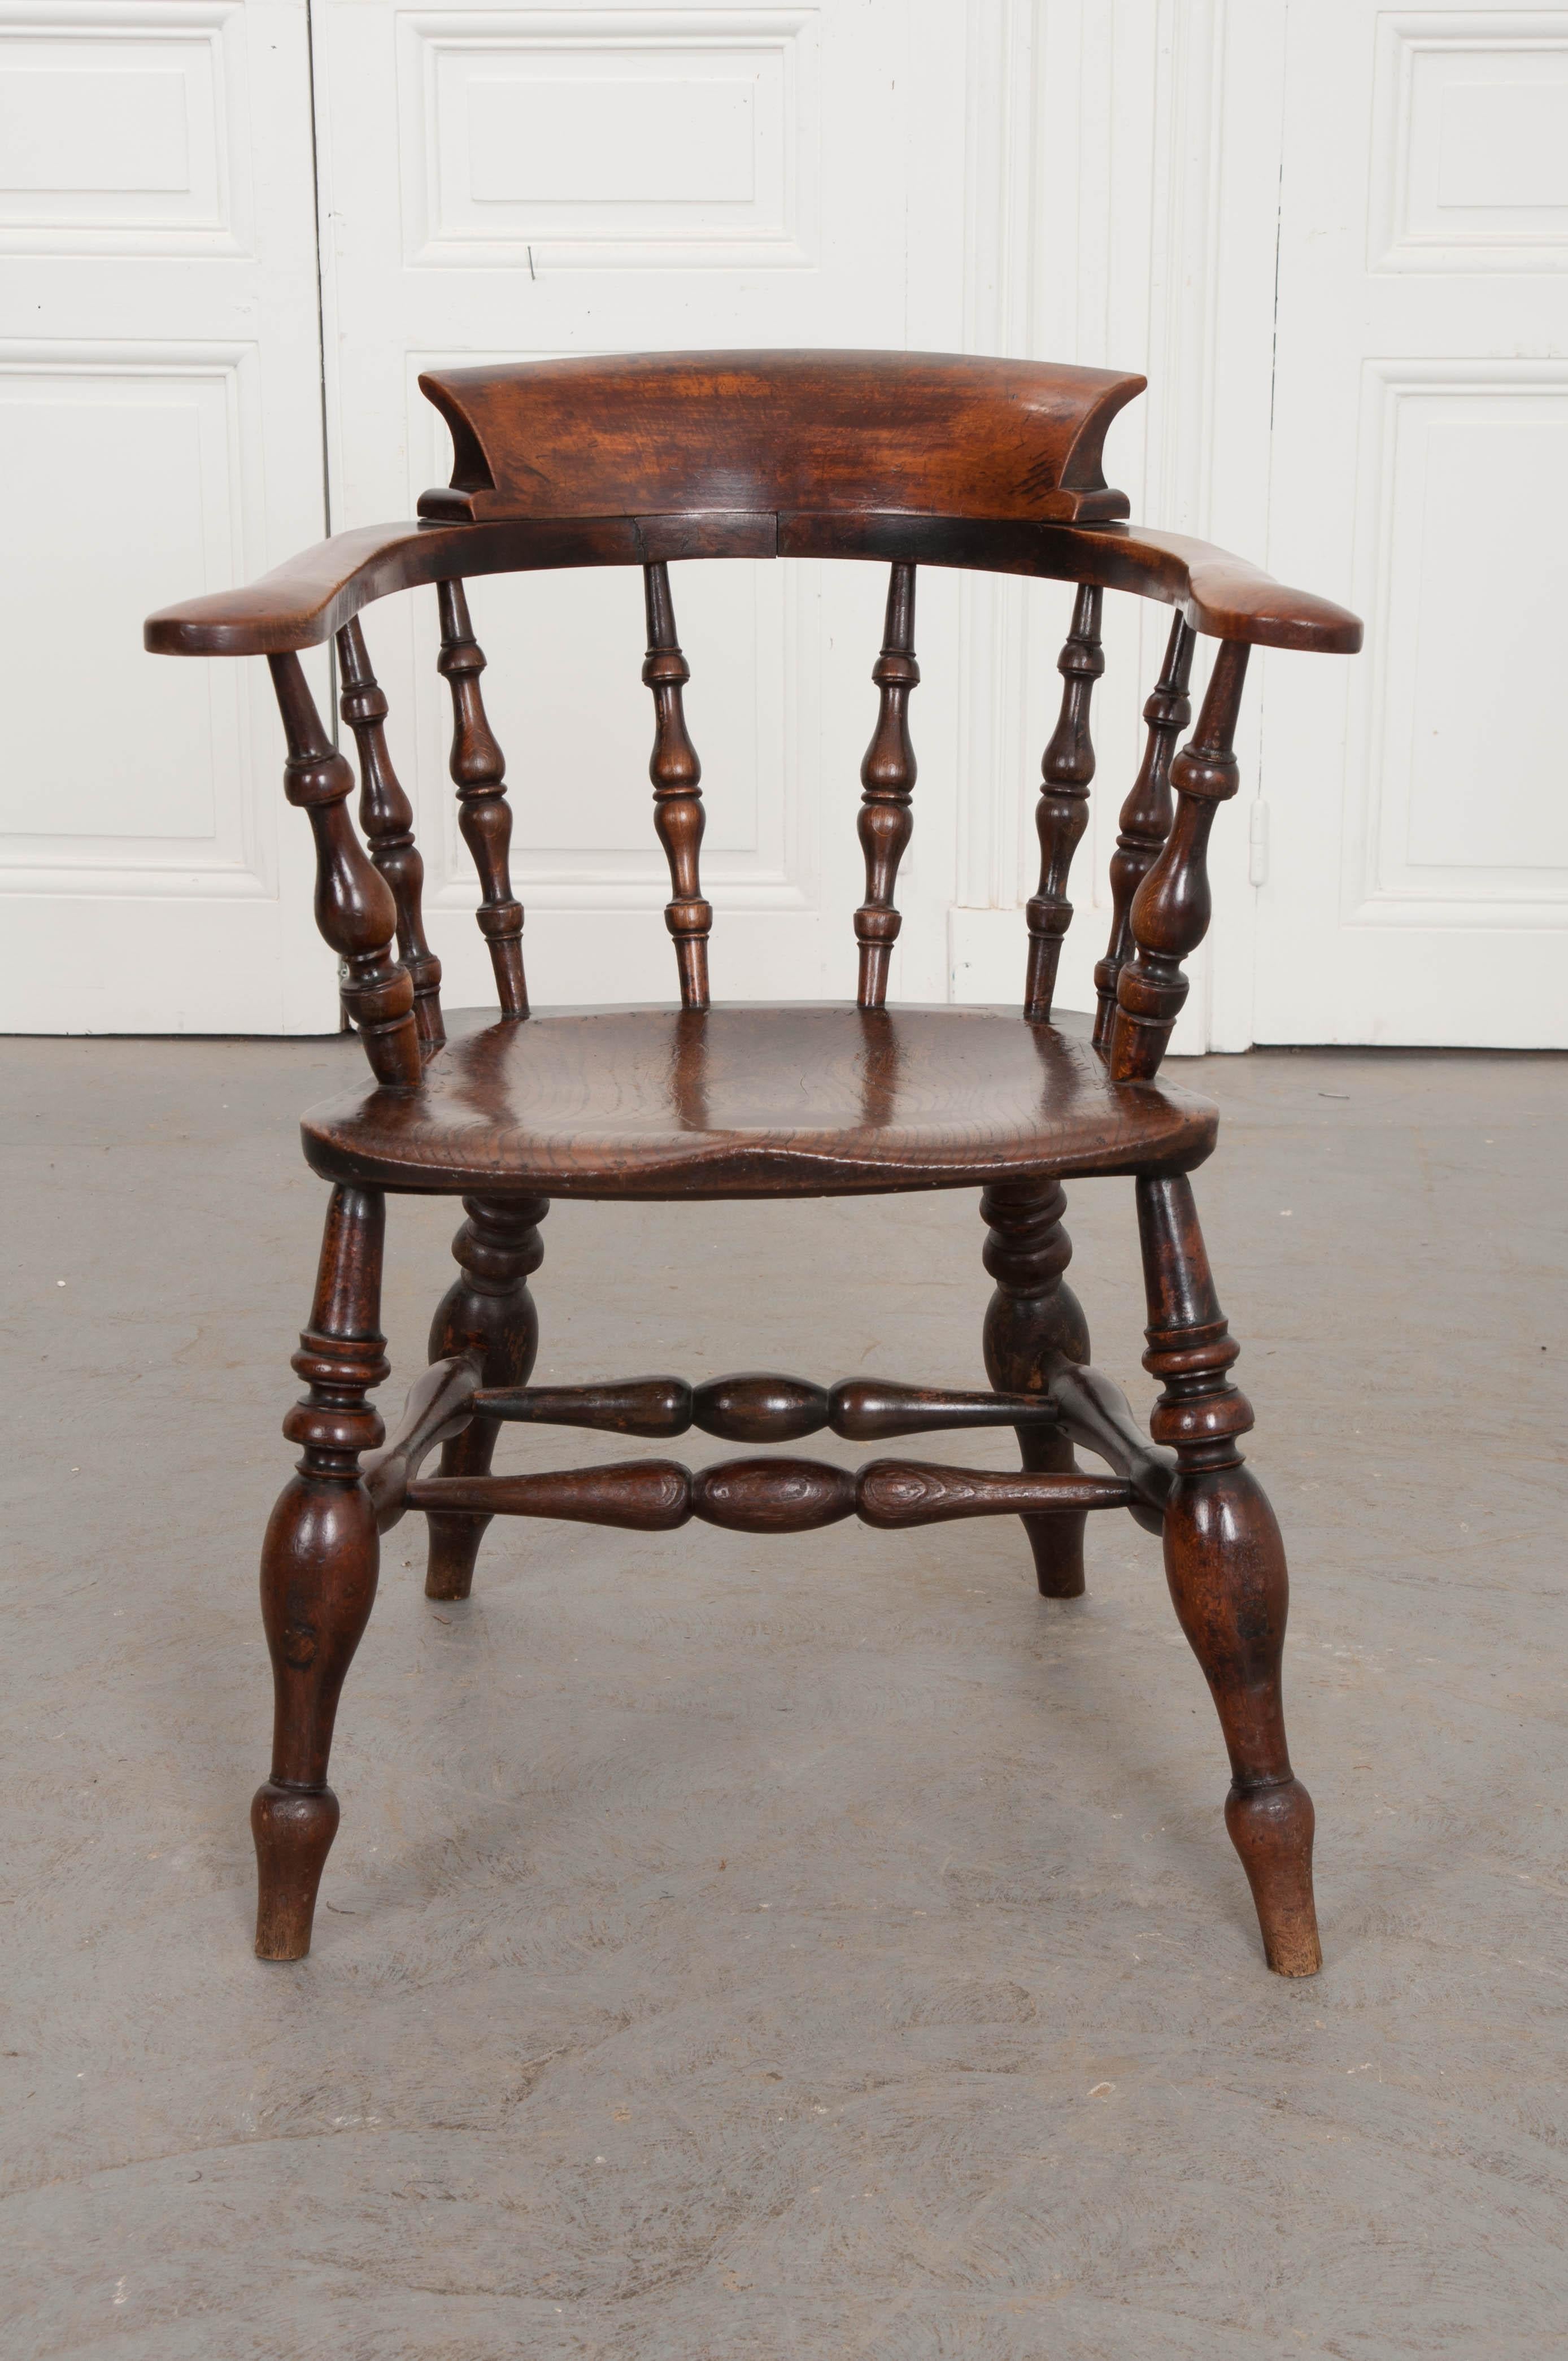 A splendid captain’s chair, made in England, circa 1870 of solid oak. The antique has fantastic turned spindle components that join to form a handsome and classically styled chair. The horseshoe shaped armrest, welled seat, and curved top rail have